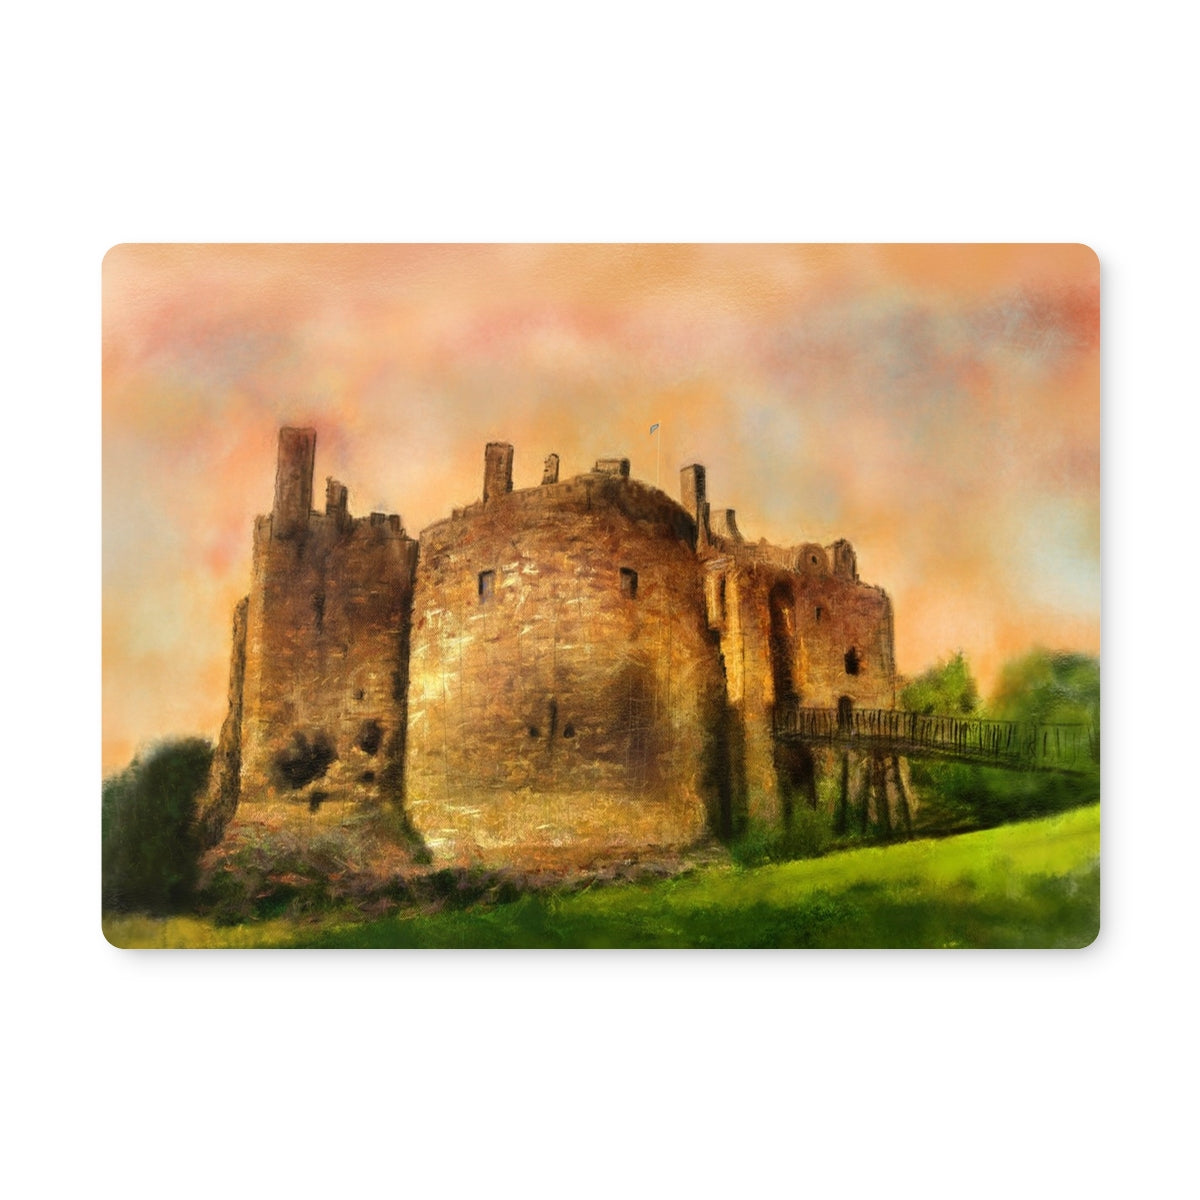 Dirleton Castle Art Gifts Placemat-Homeware-Prodigi-6 Placemats-Paintings, Prints, Homeware, Art Gifts From Scotland By Scottish Artist Kevin Hunter